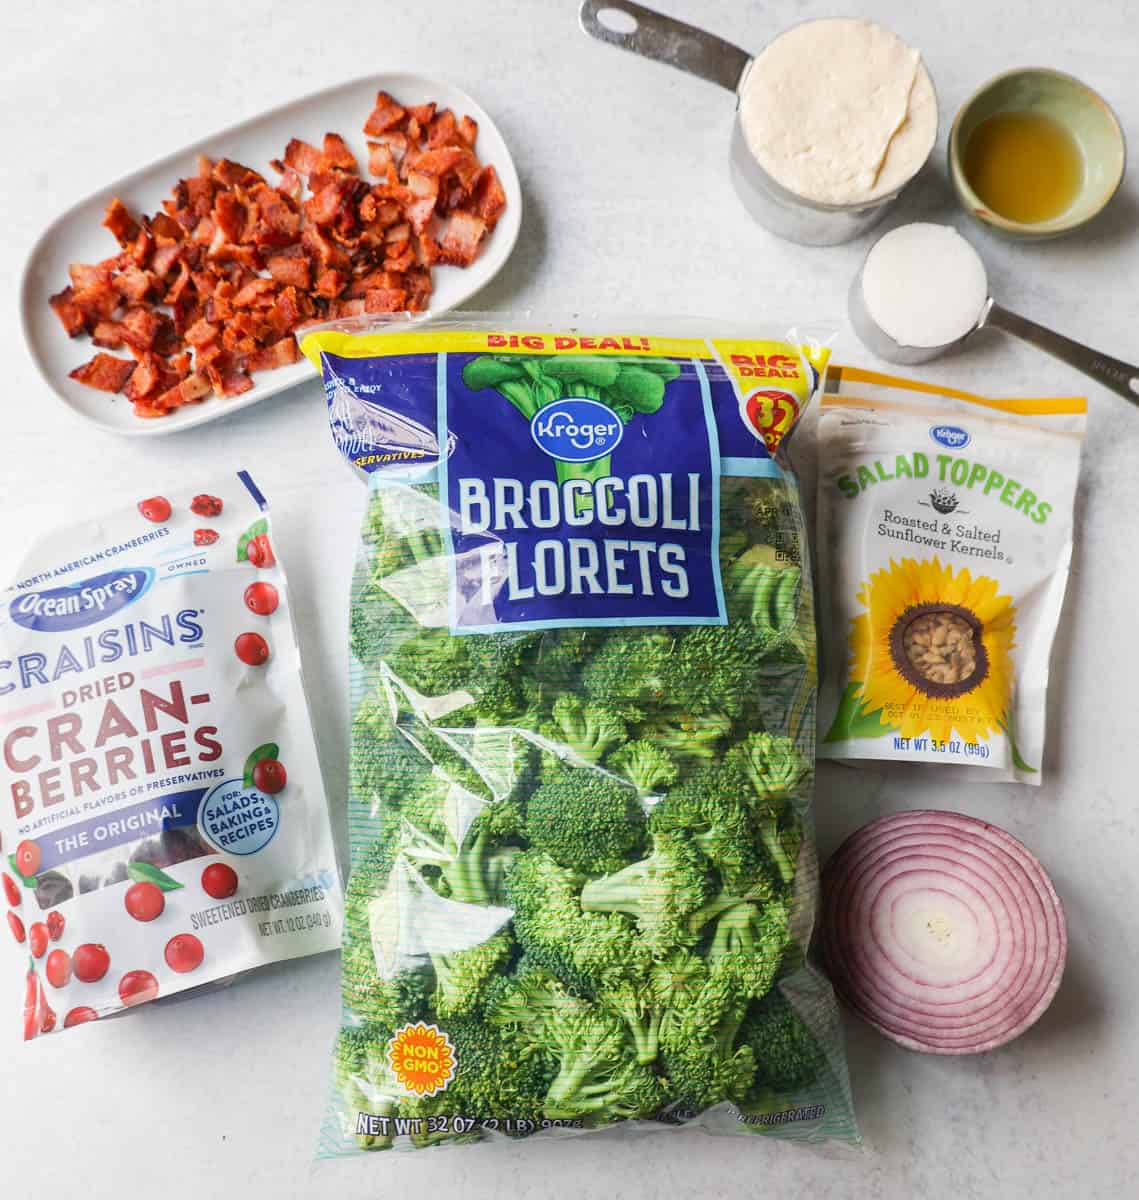 Broccoli Salad Ingredients. What Ingredients go in broccoli salad. Broccoli Salad made with bacon, cranberries, onion, nuts, and sweet and tangy dressing.